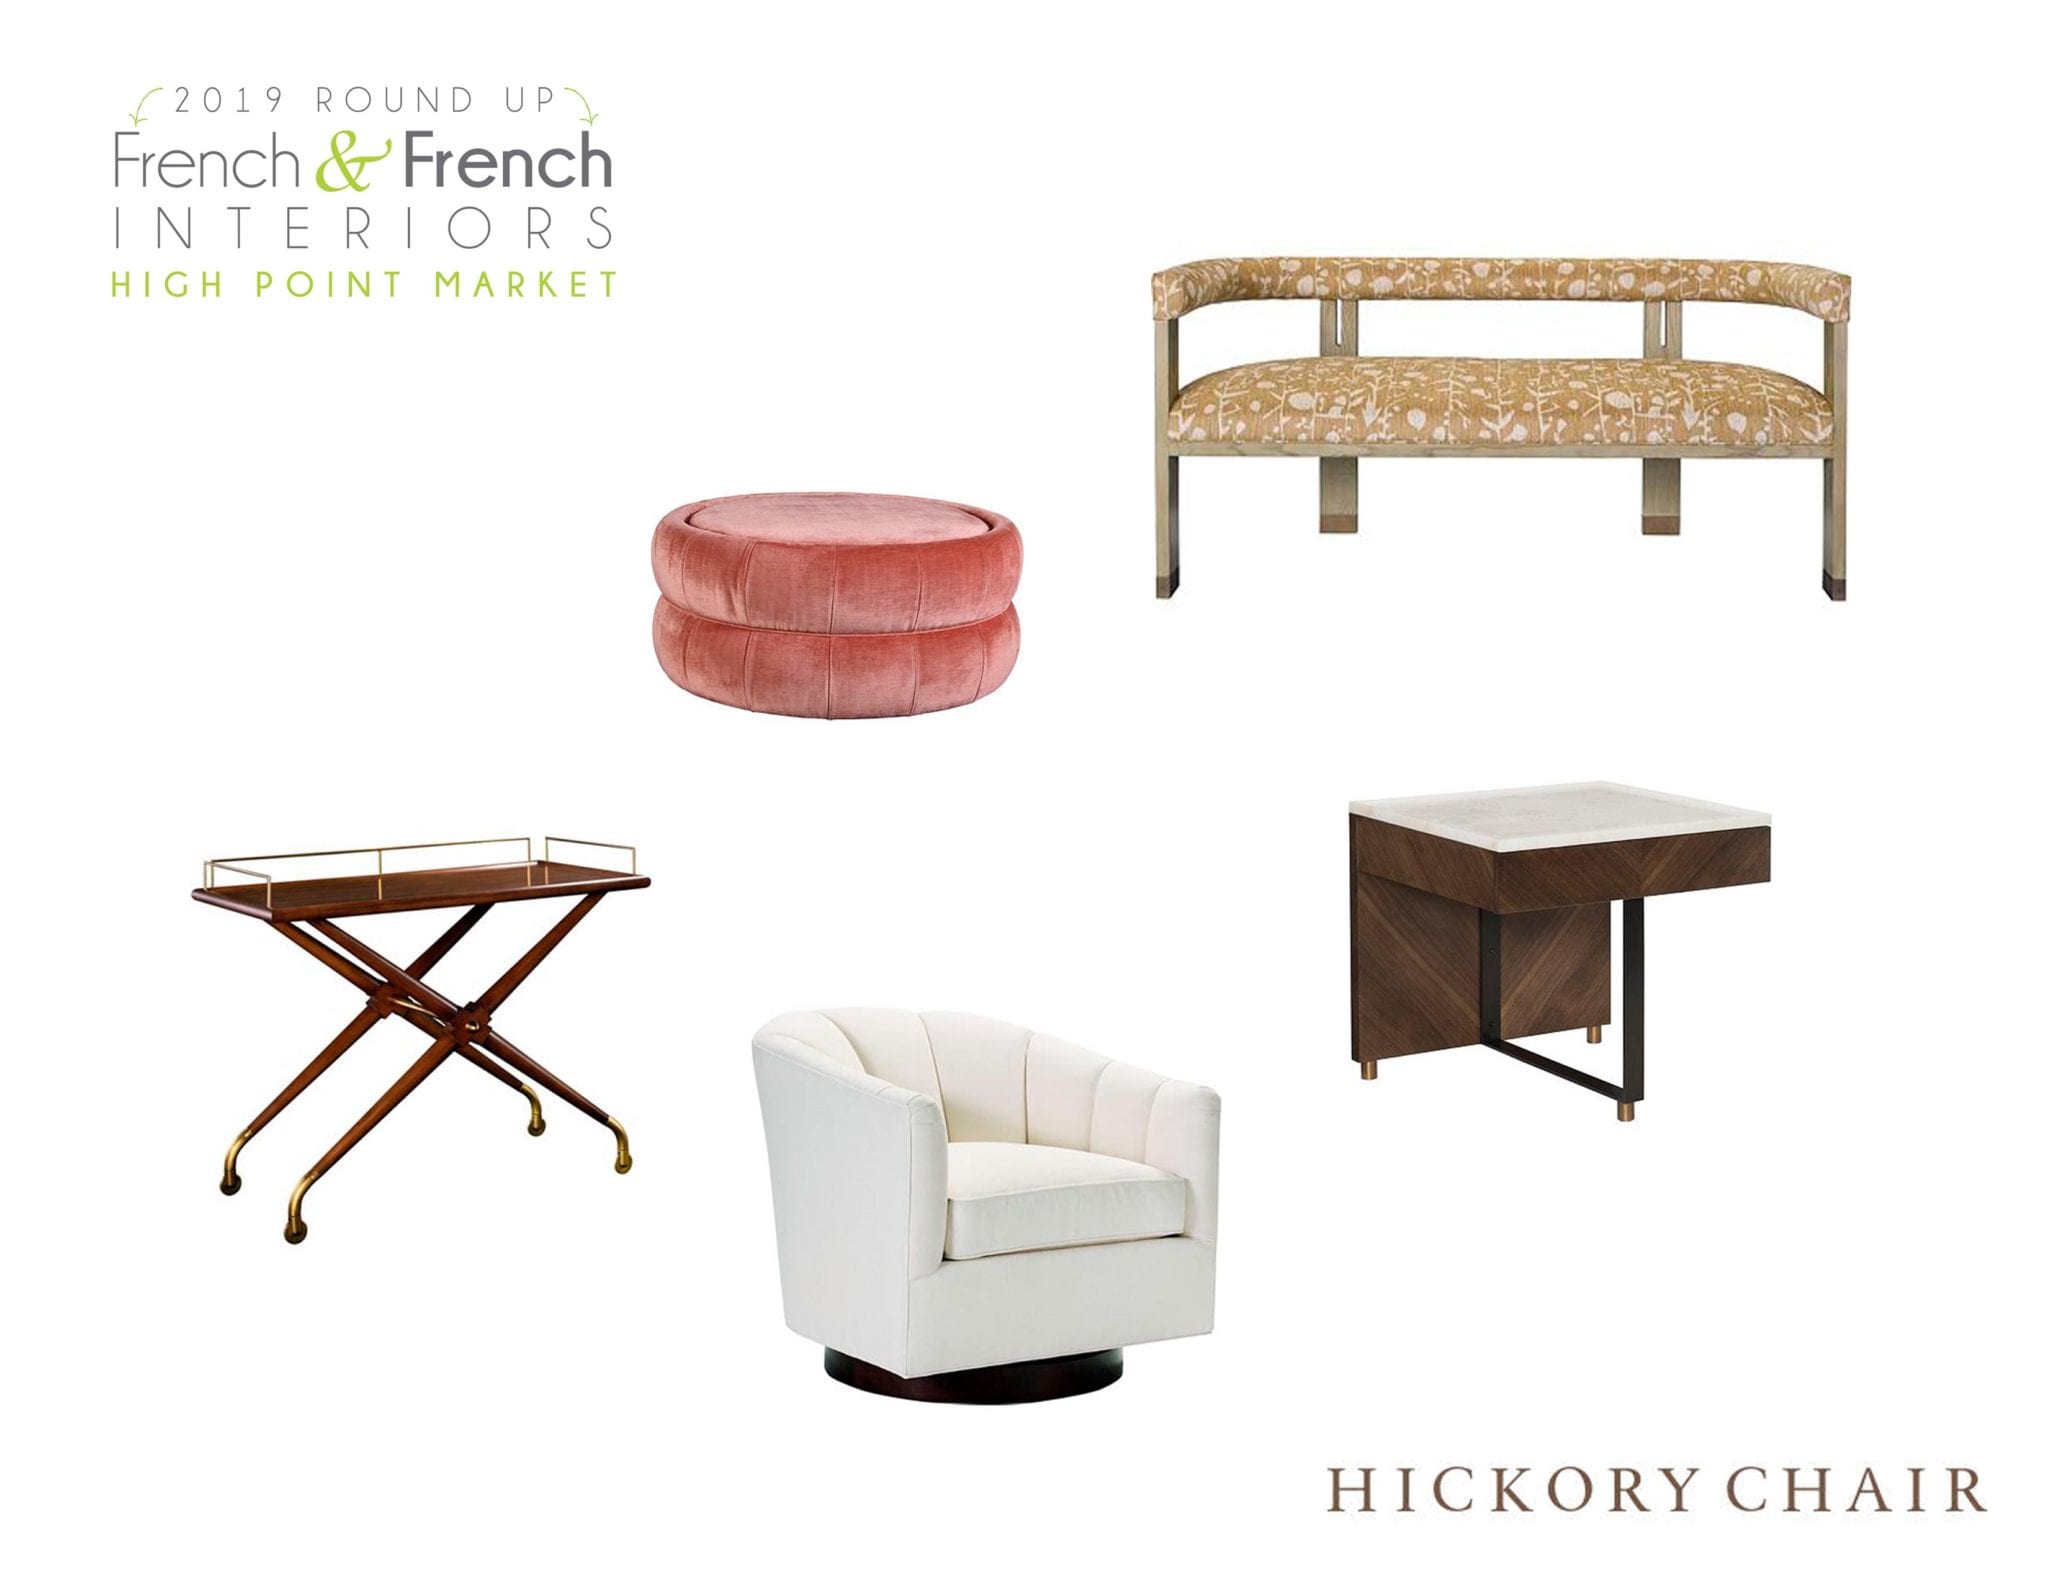 graphic for 2019 Round up from French & French Interiors High Point Market with different furniture items from Hickory Chair